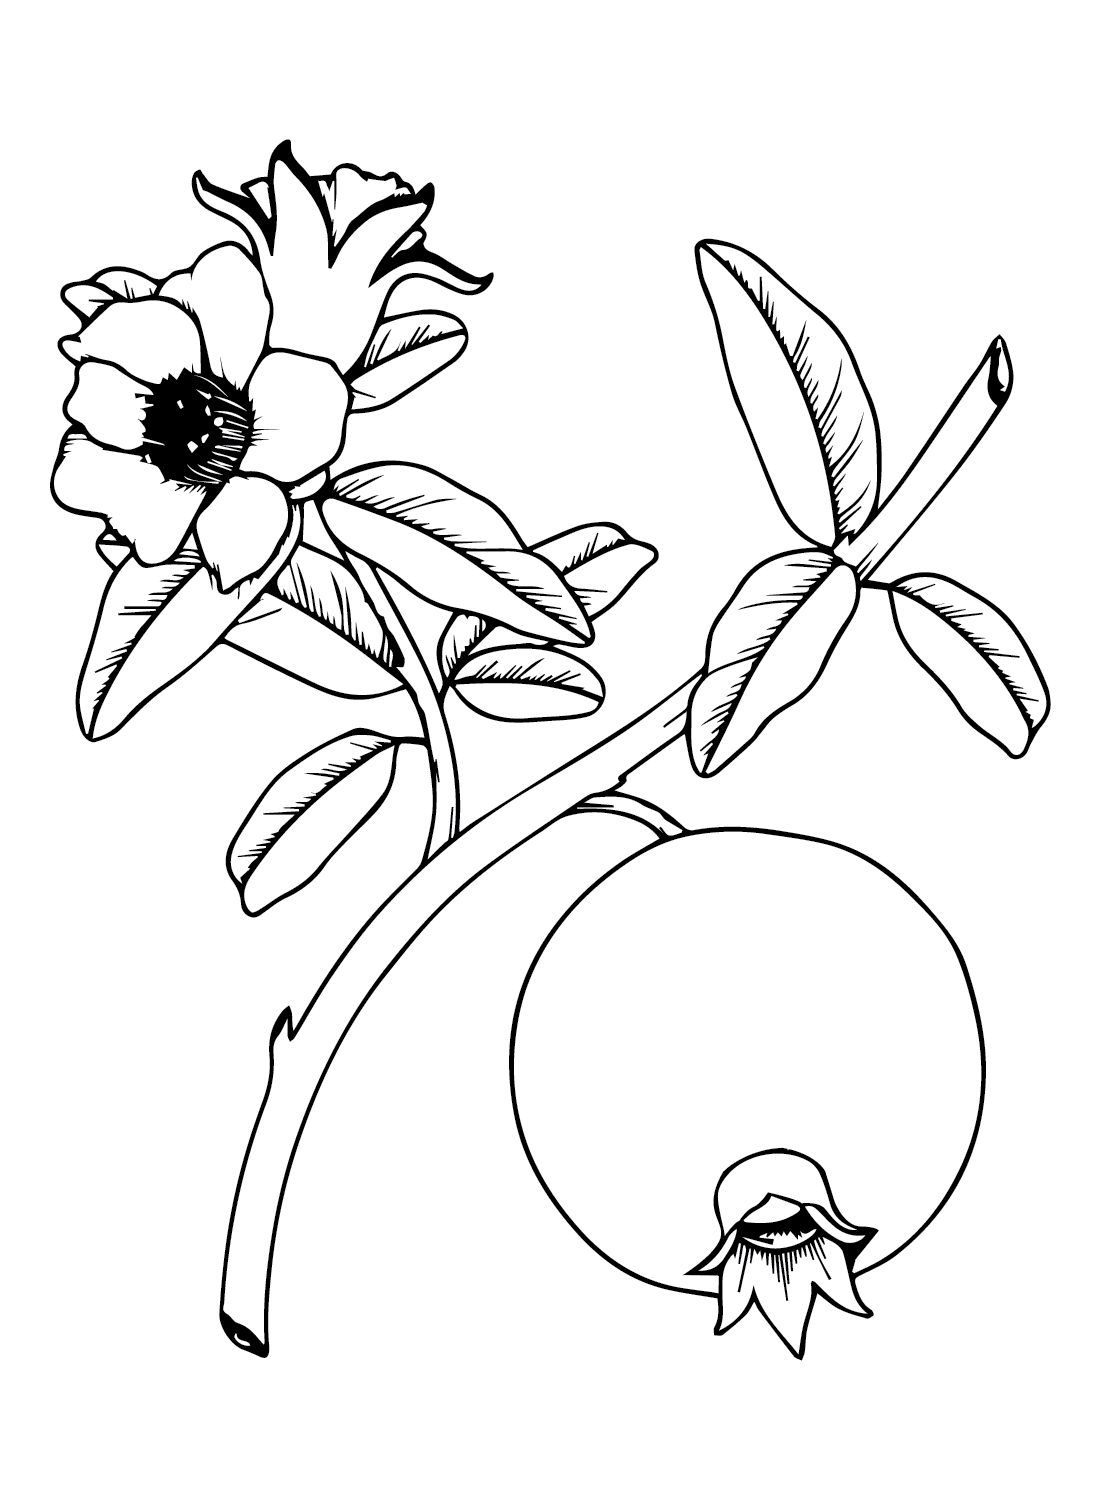 Pomegranate for Kids Coloring Page